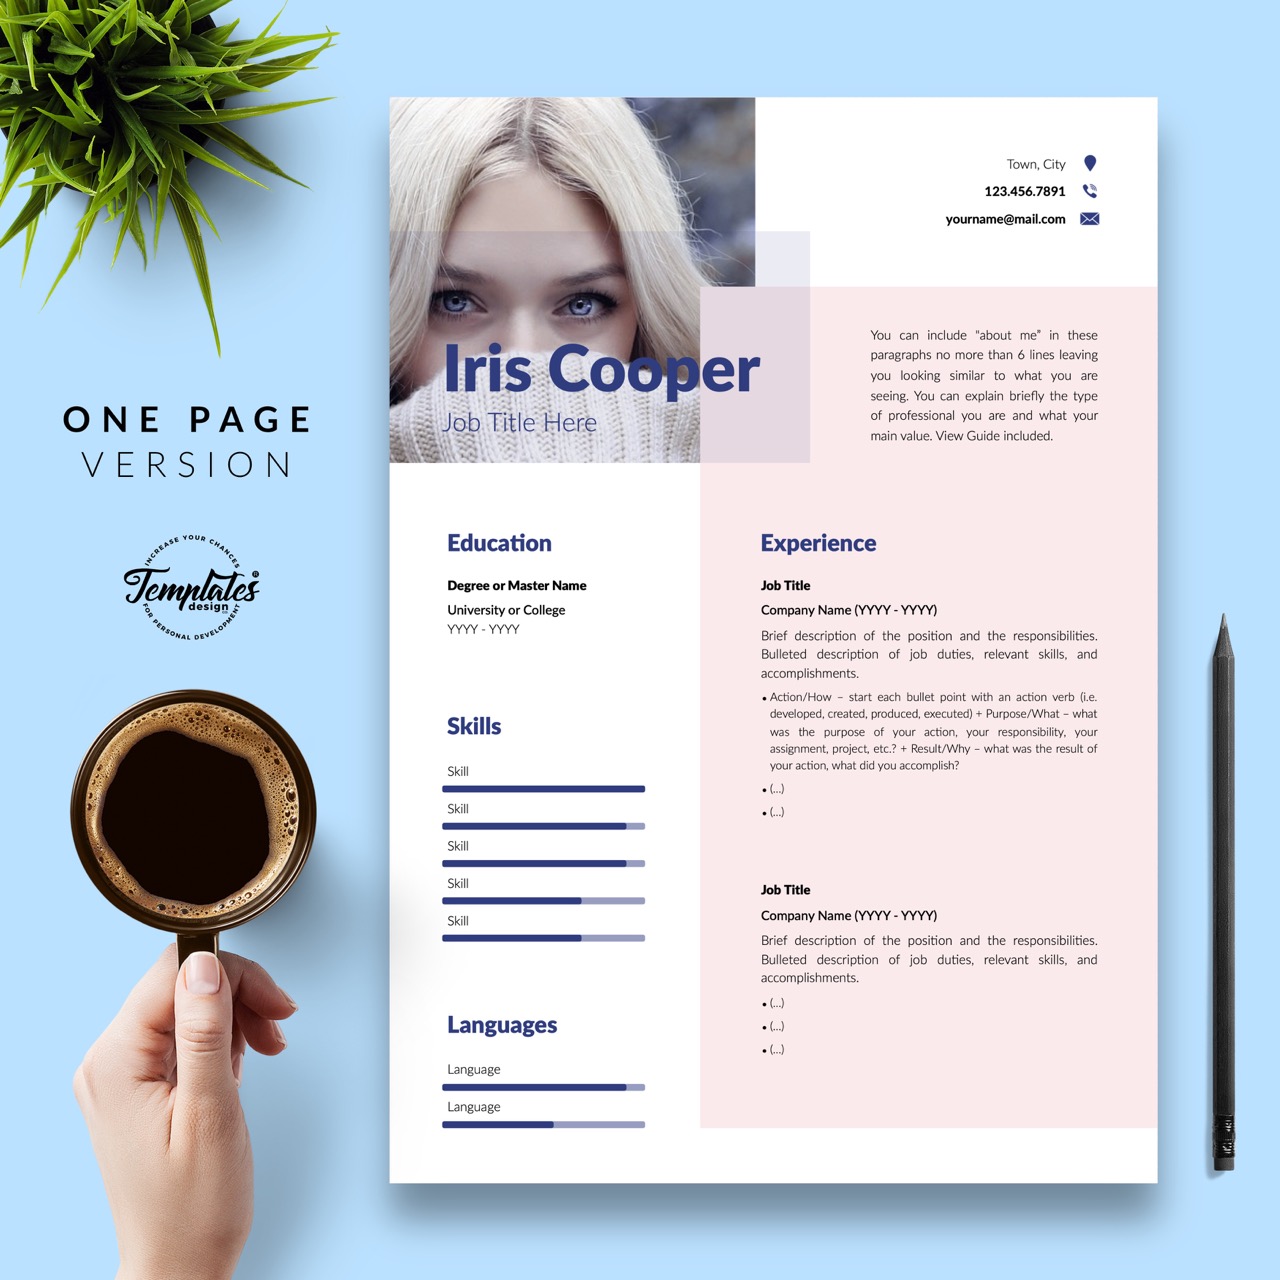 Person holding a cup of coffee next to a resume.